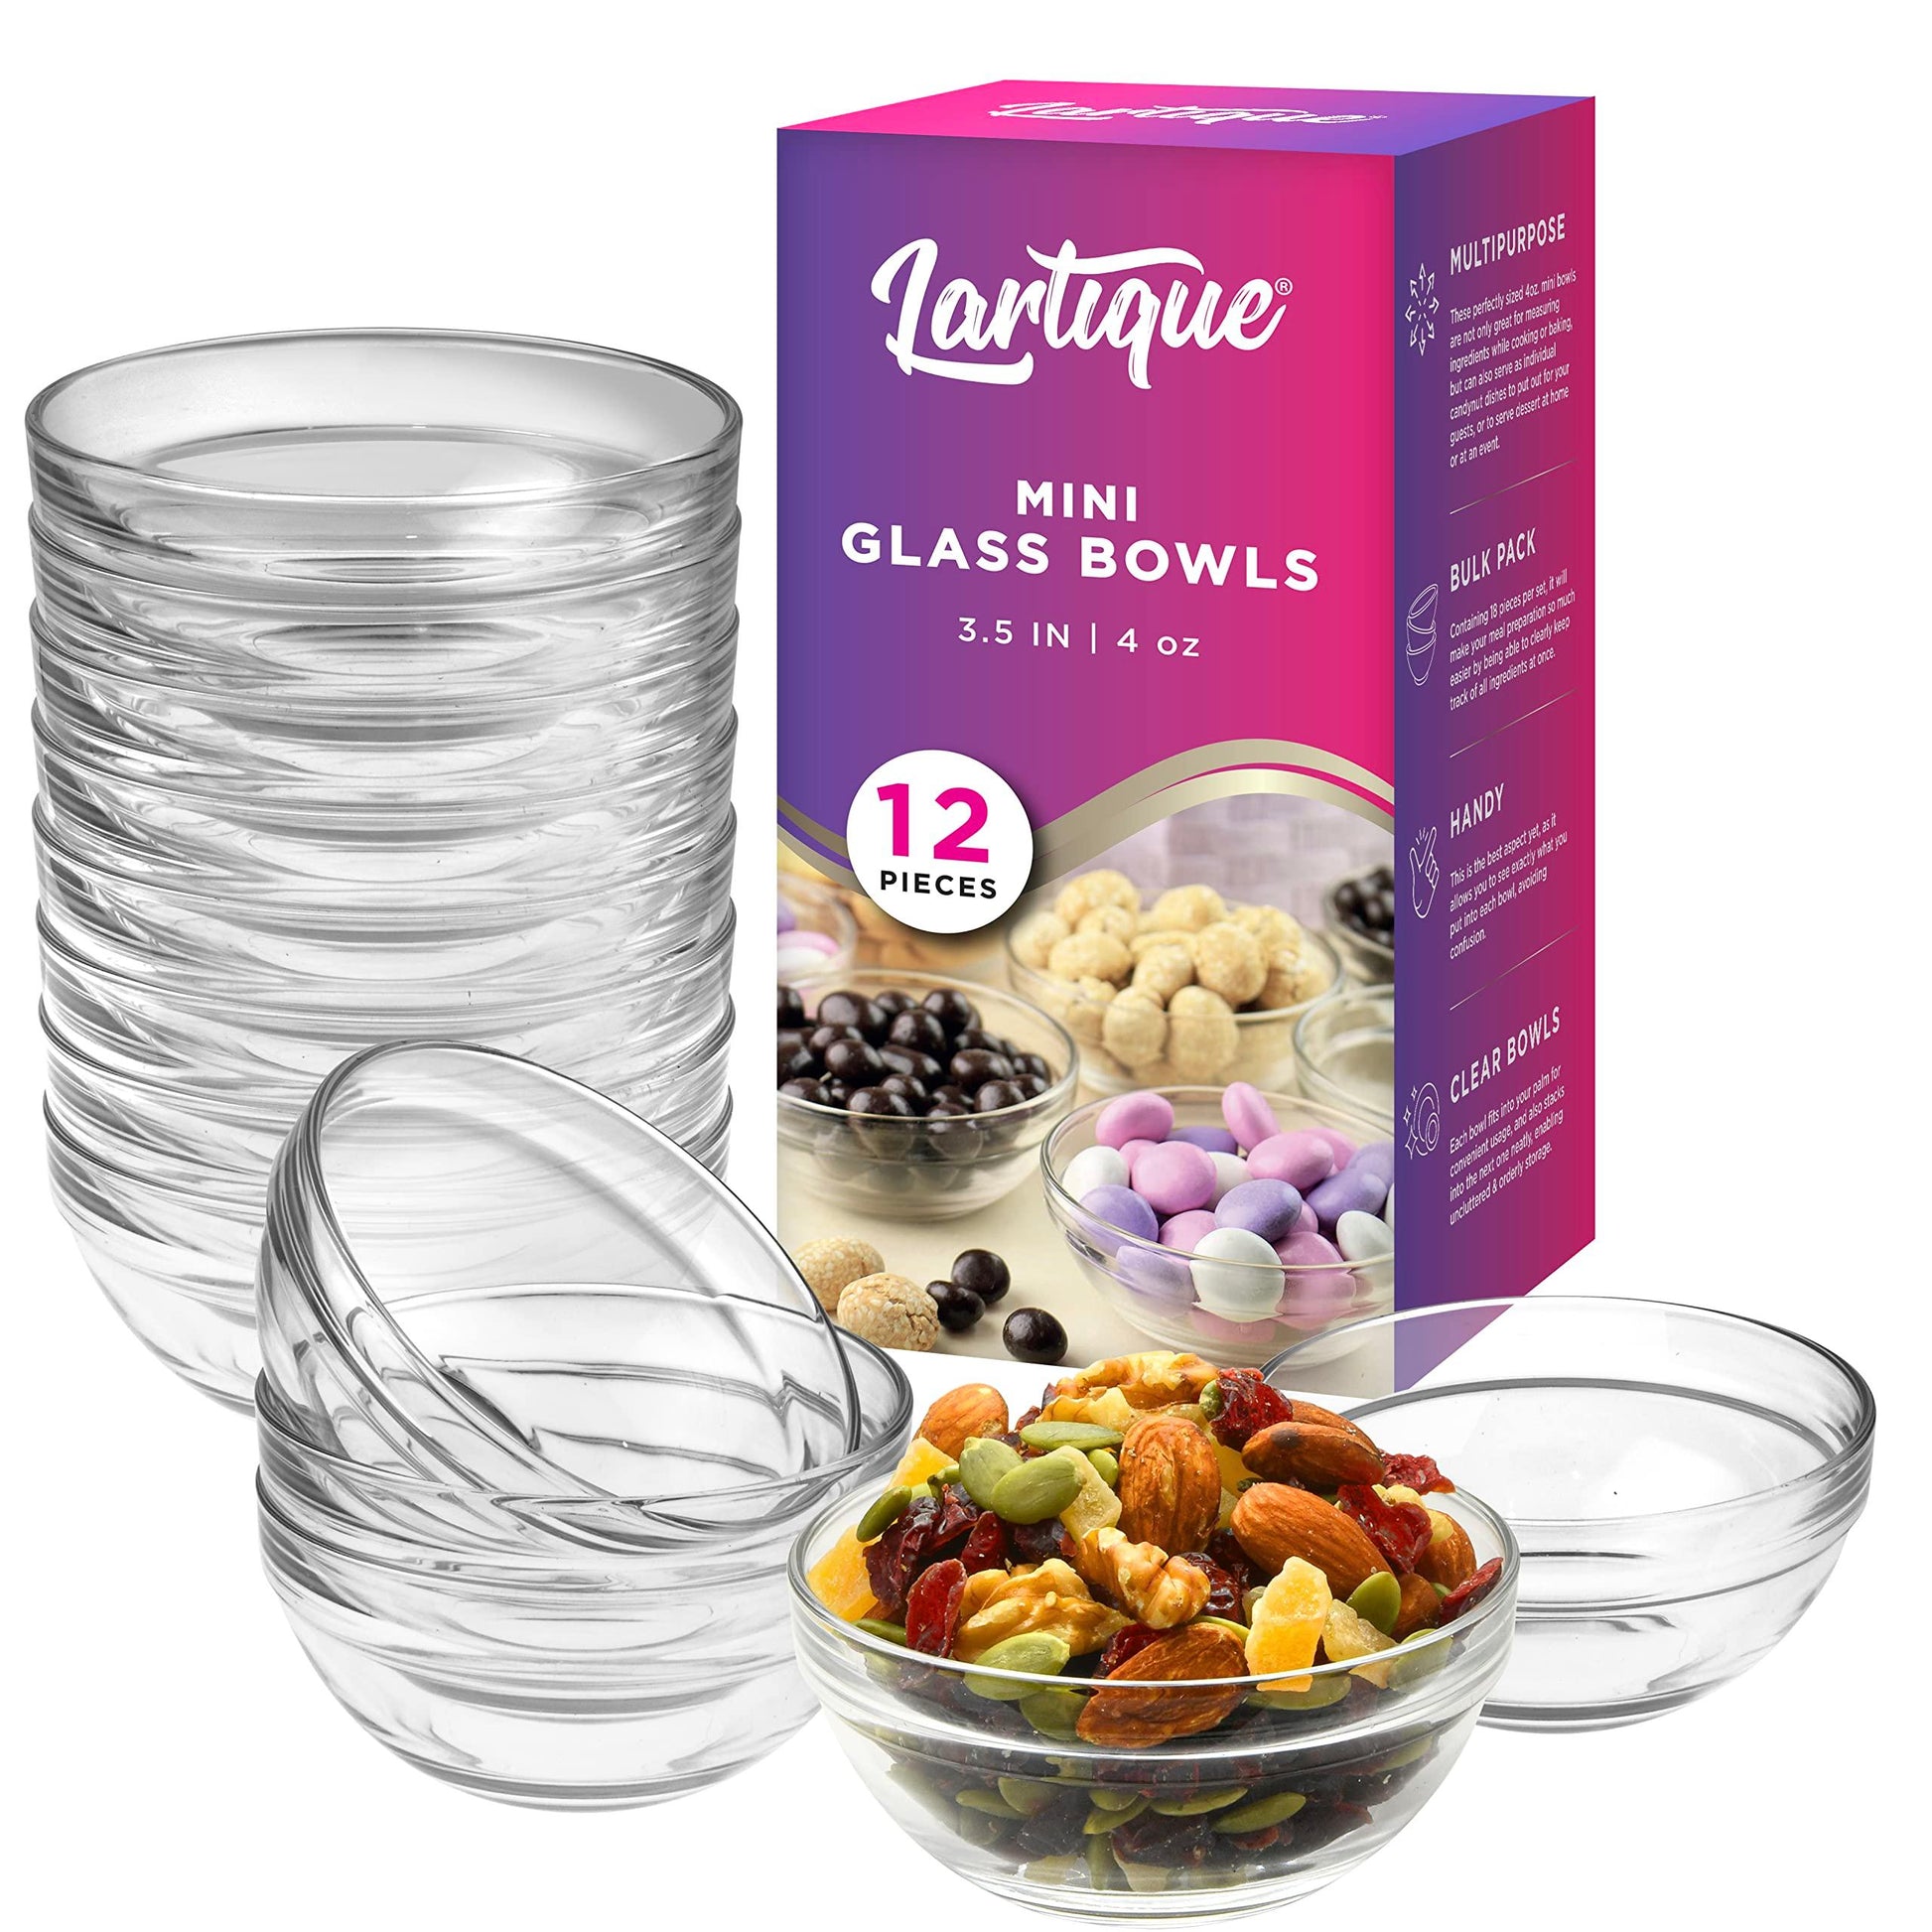 Lartique Mini 3.5 Inch Small Glass Bowls - Small Bowls Perfect for Prep, Dips, Nuts, or Candy - Glass Prep Bowls or Mise en Place Bowls, Set of 12 - CookCave